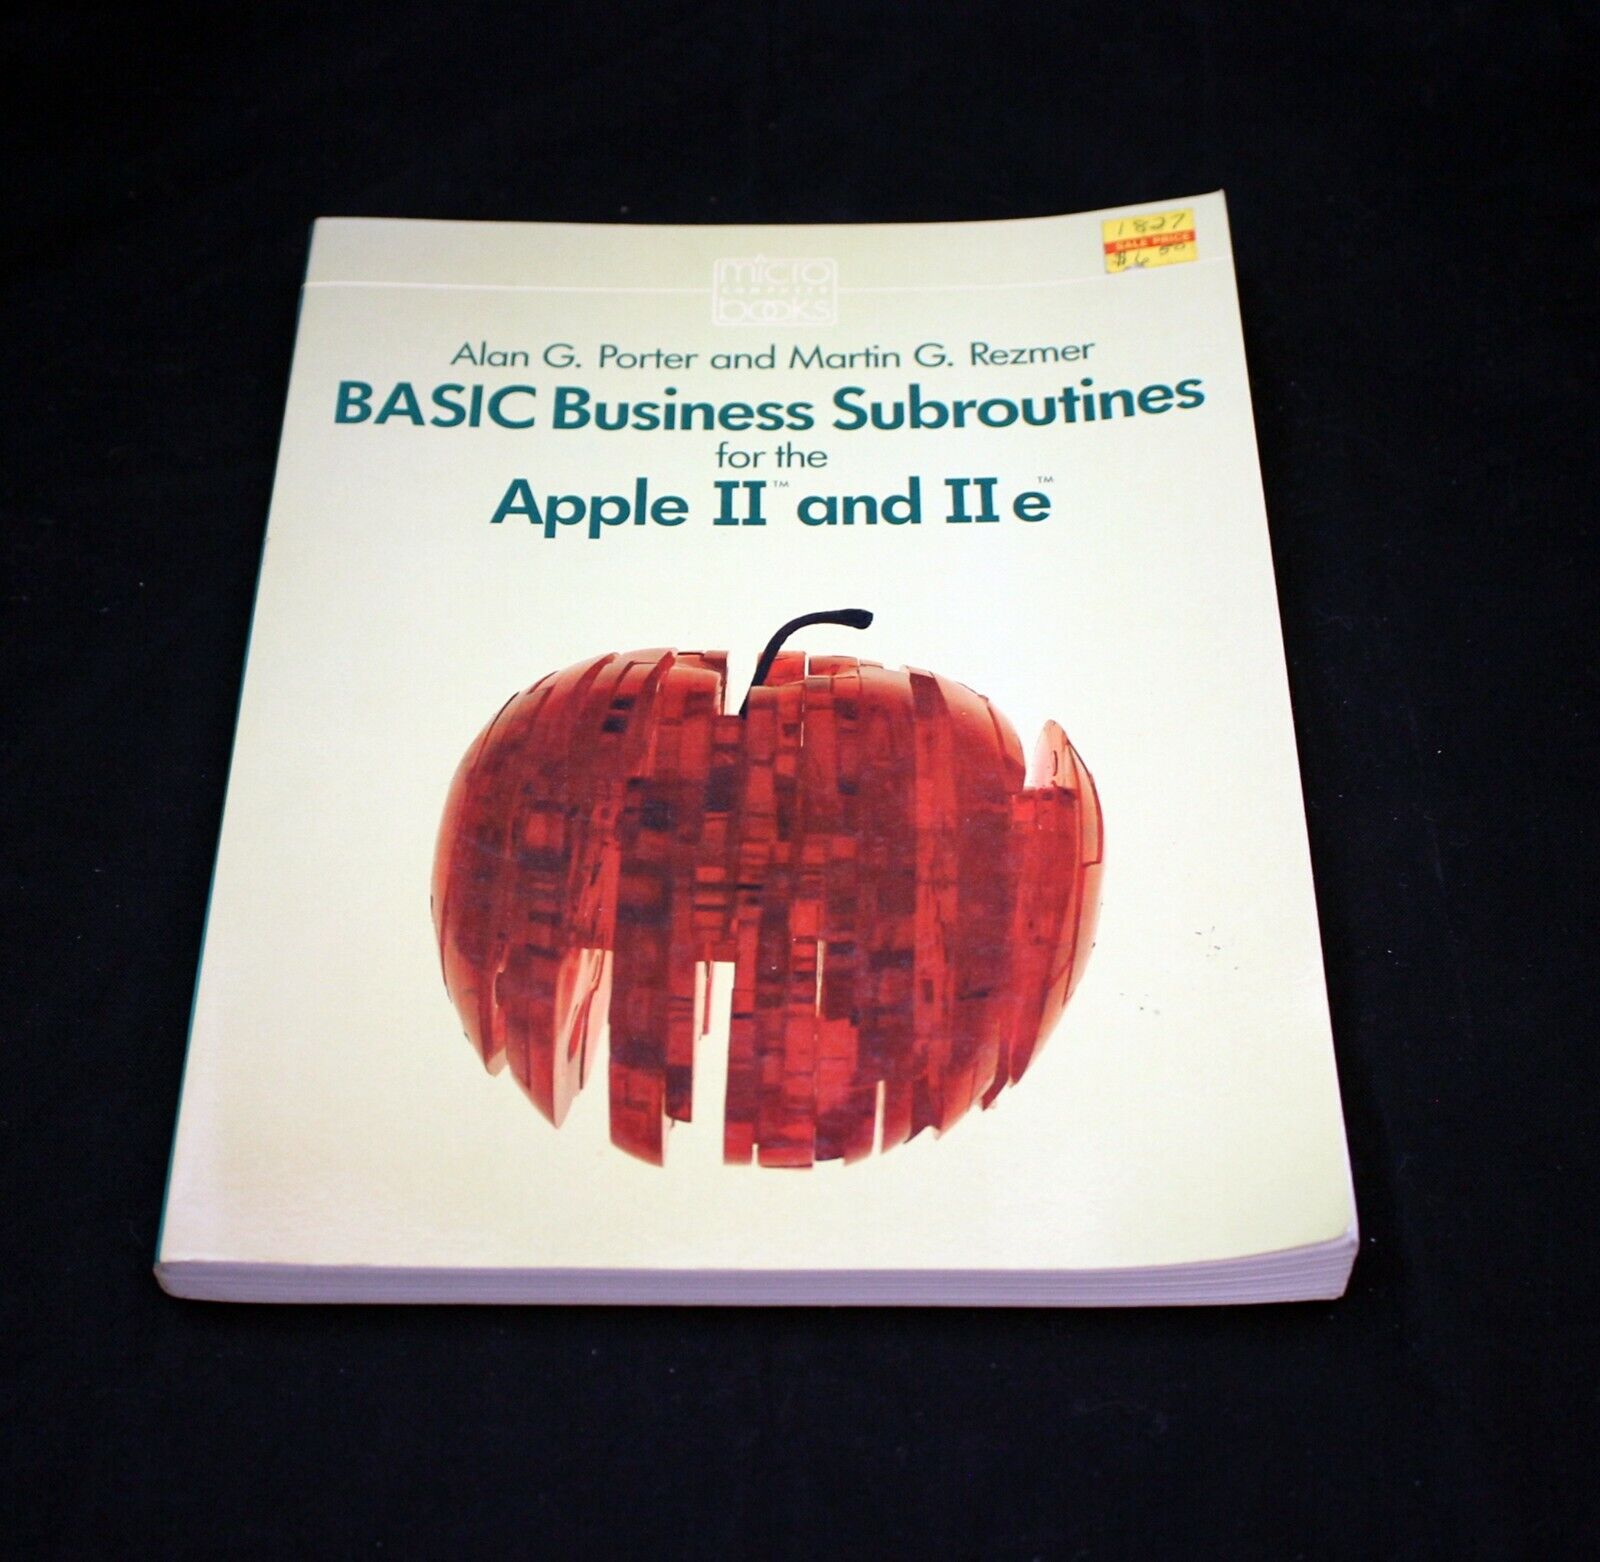 1984 BASIC Business Subroutines for Apple II and IIe VTG Computer Bk APPLESOFT